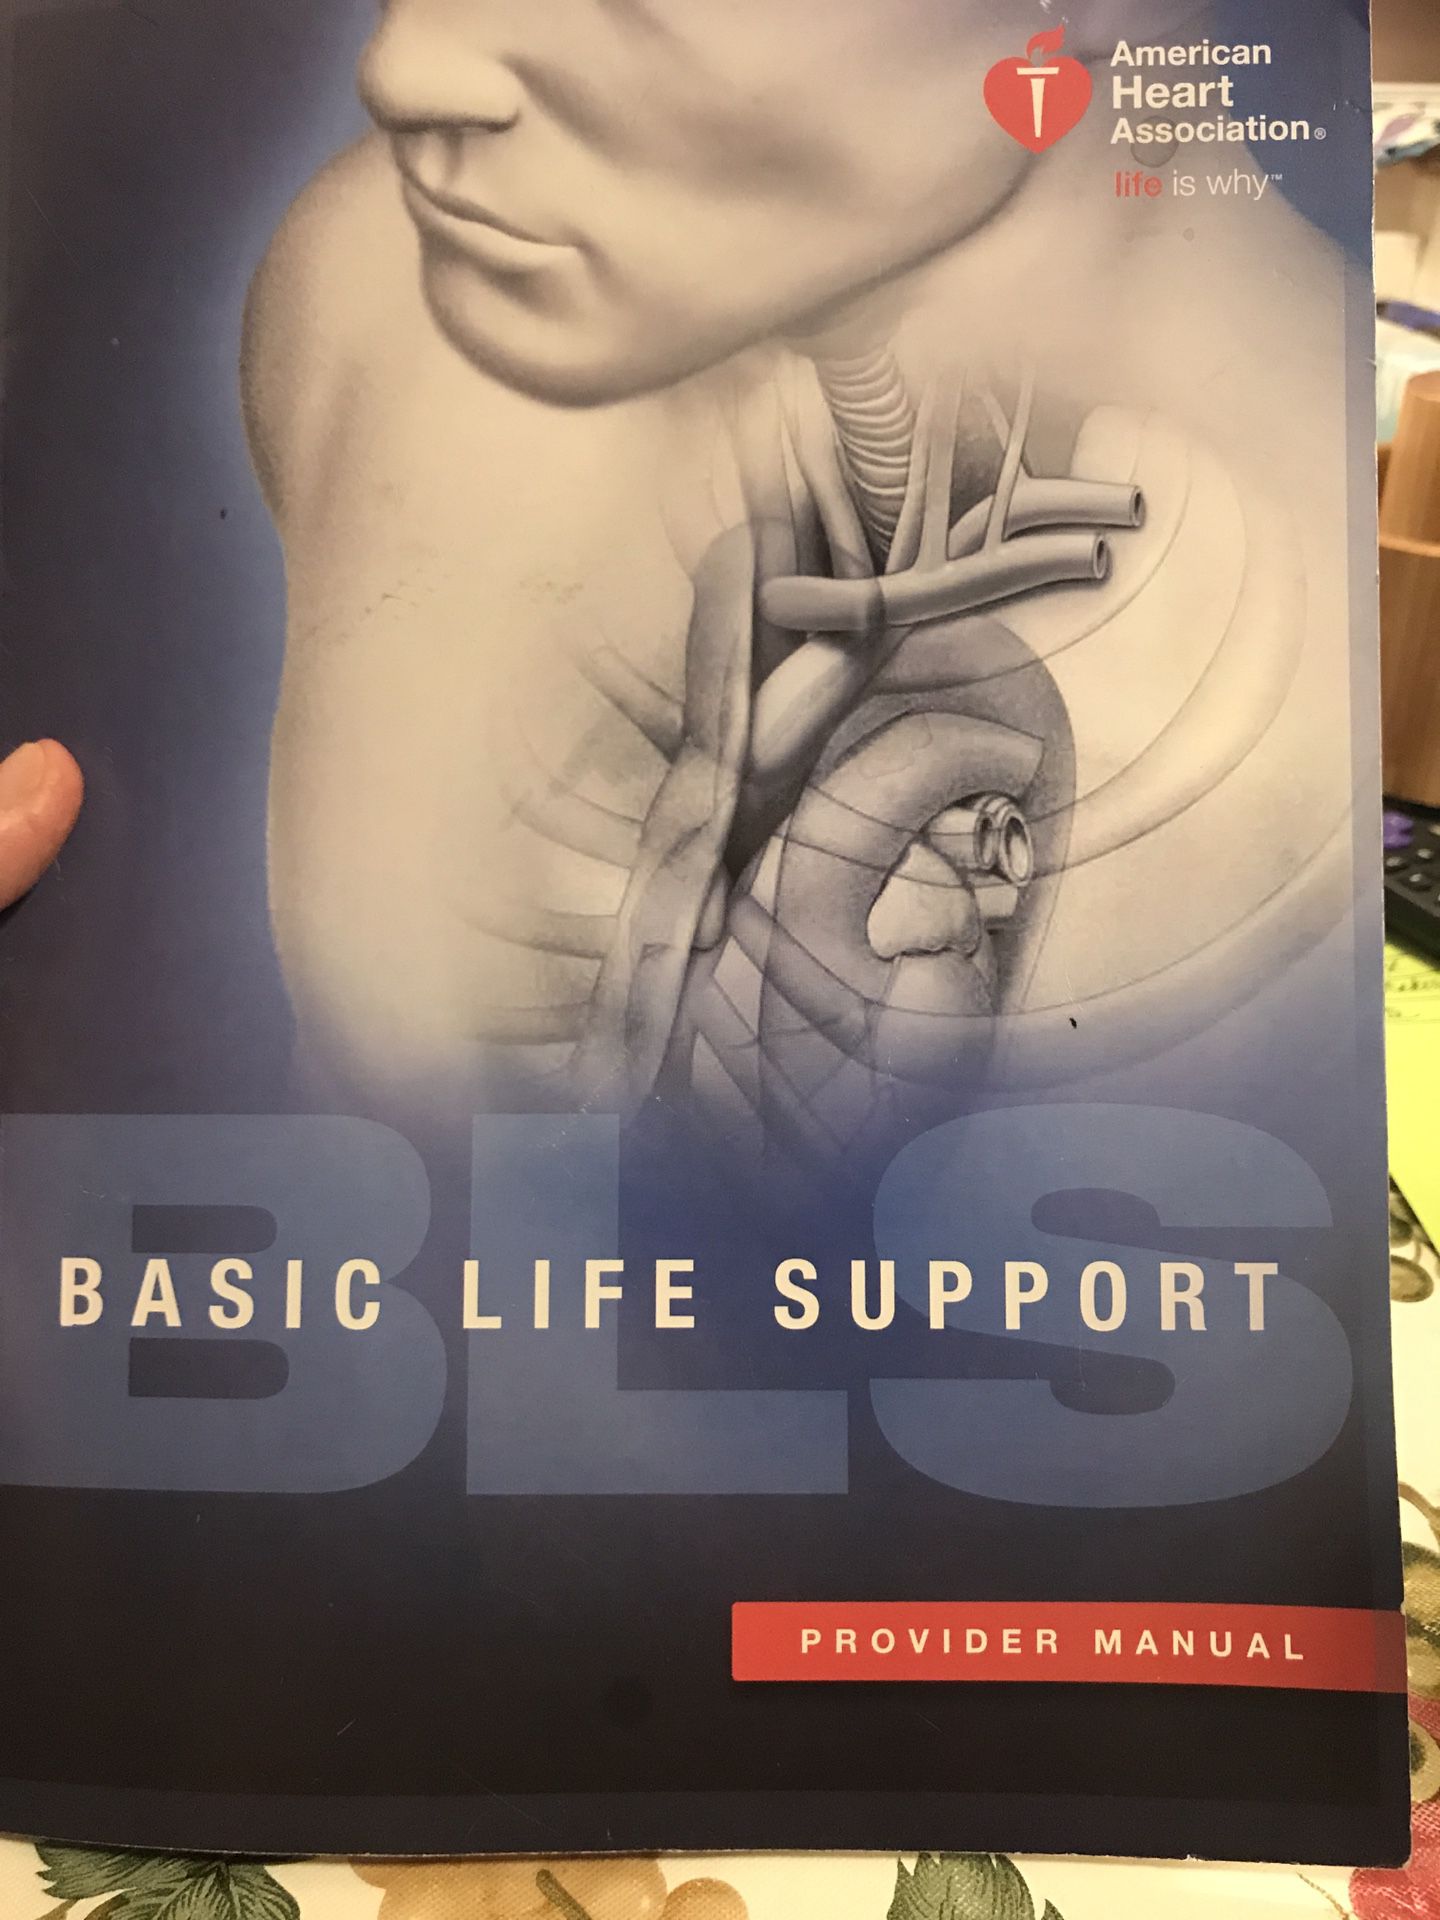 Basic life support manual new edition $4